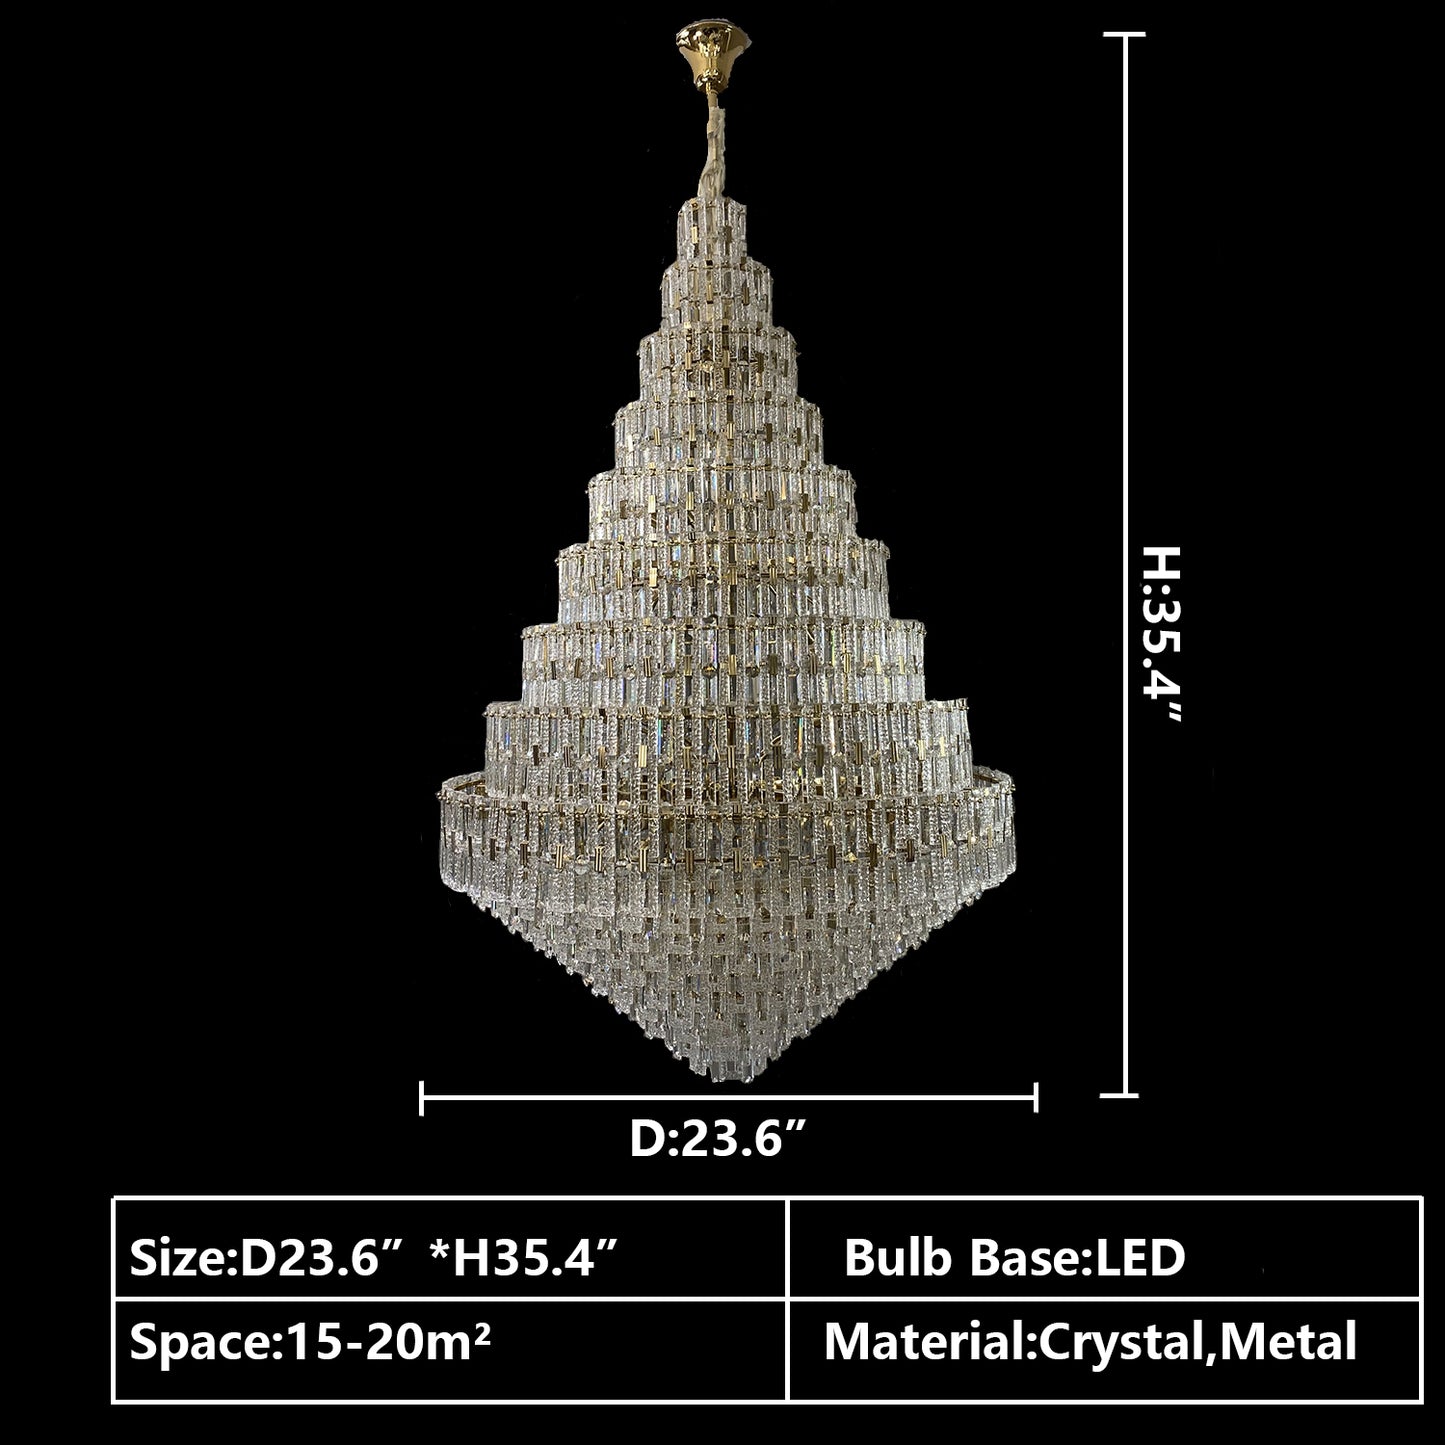 D23.6"*H35.4" chandelier,chandelirs,pendant,lamp,lights,crystal,metal,gold,chrome,tiers,layers,multi-tier,multi-layer,extra large,large,oversized,huge,big,honeycomb,ceiling,living room,dining room,foyer,stairs,entrys,hallway,loft,duplex hall,hotel lobby